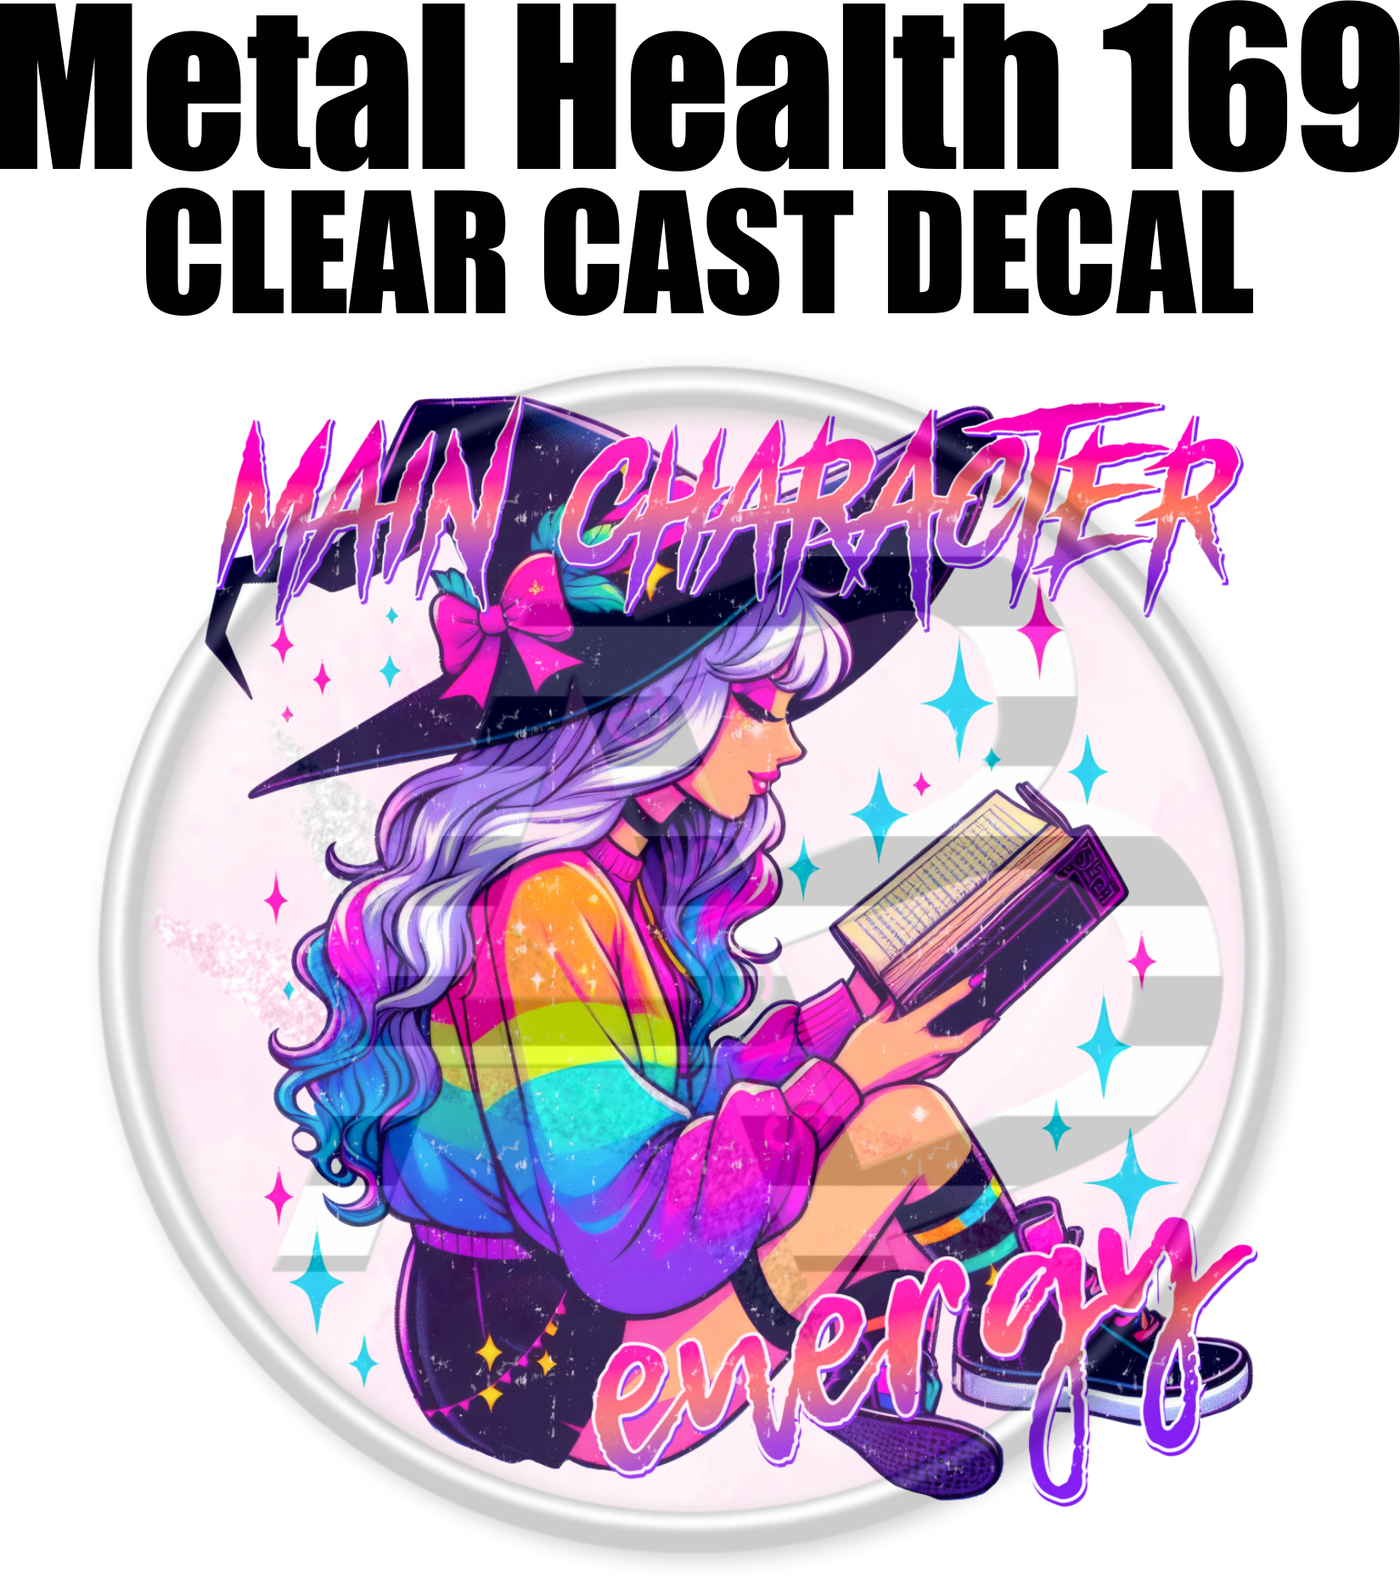 Mental Health 169 - Clear Cast Decal-638